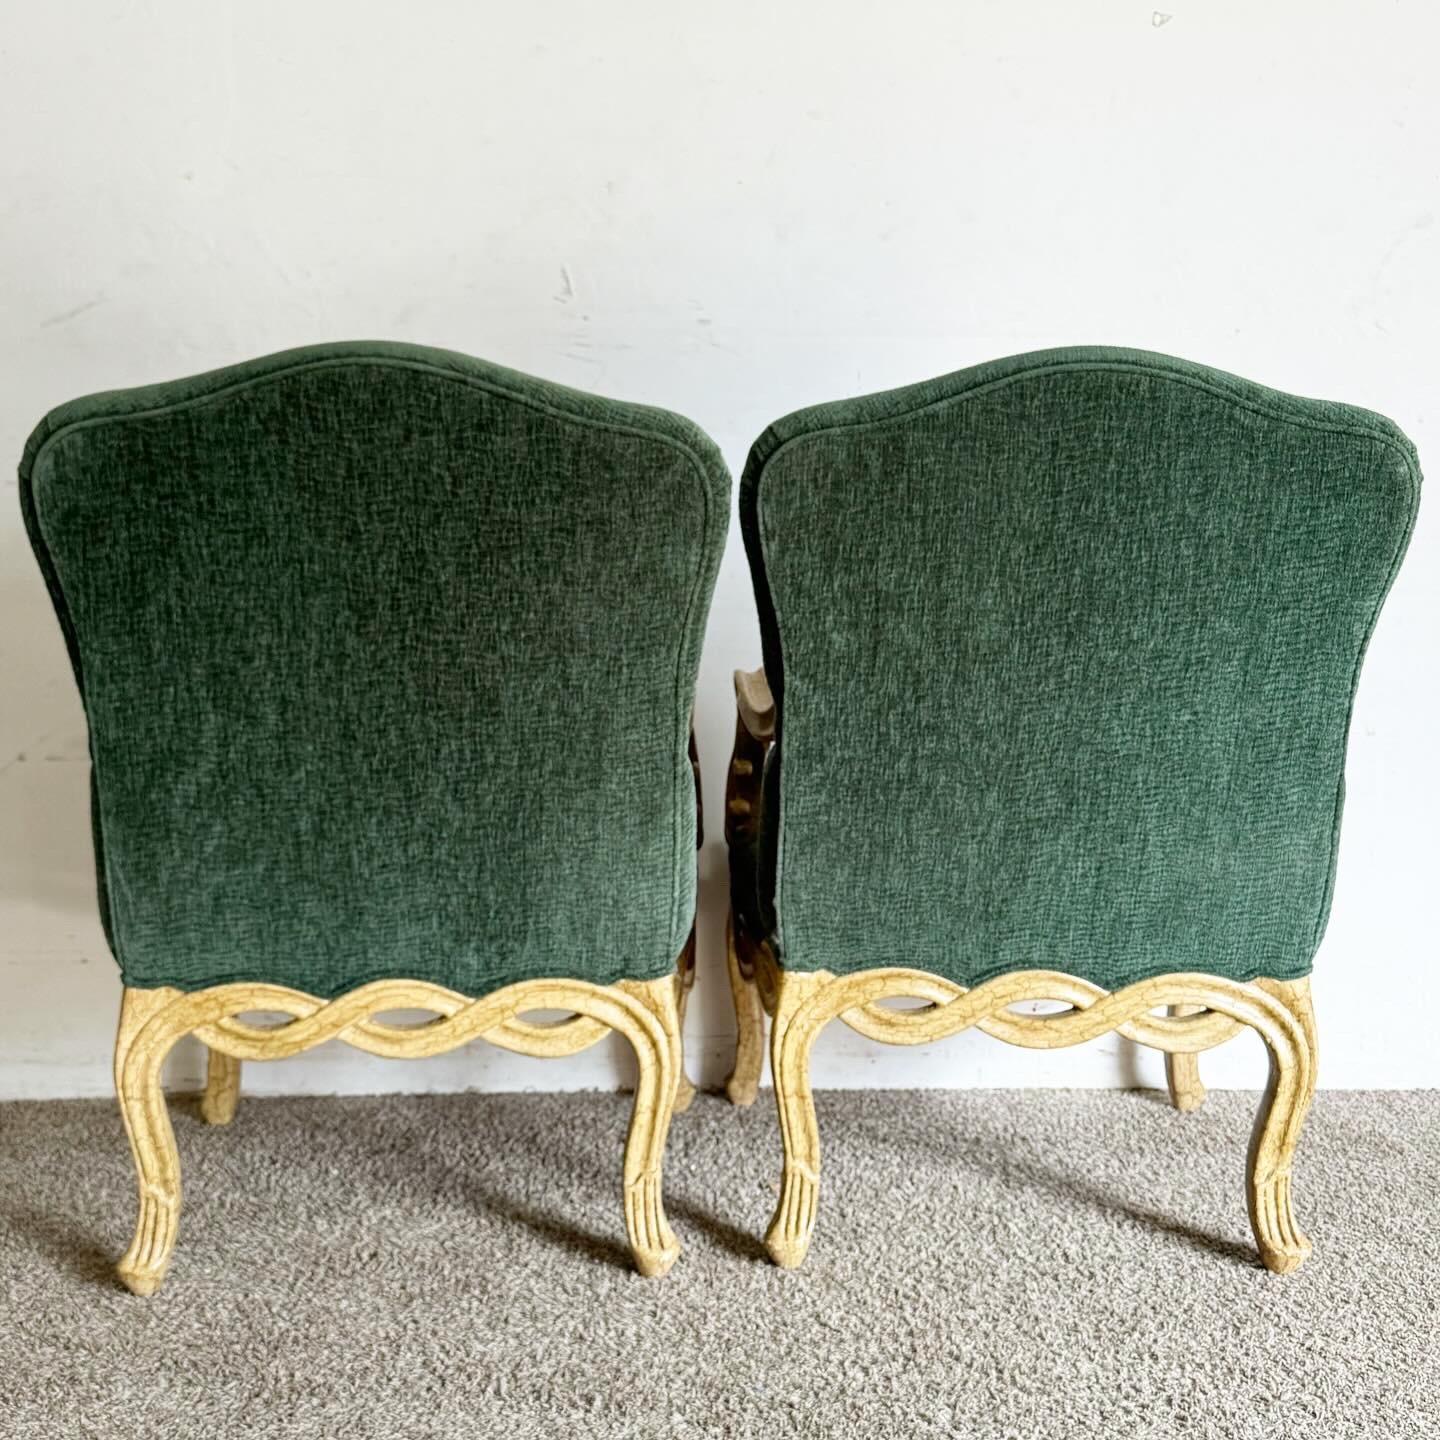 Late 20th Century French Provincial Style Green Arm Chairs With Twisting Wooden Frame - a Pair For Sale